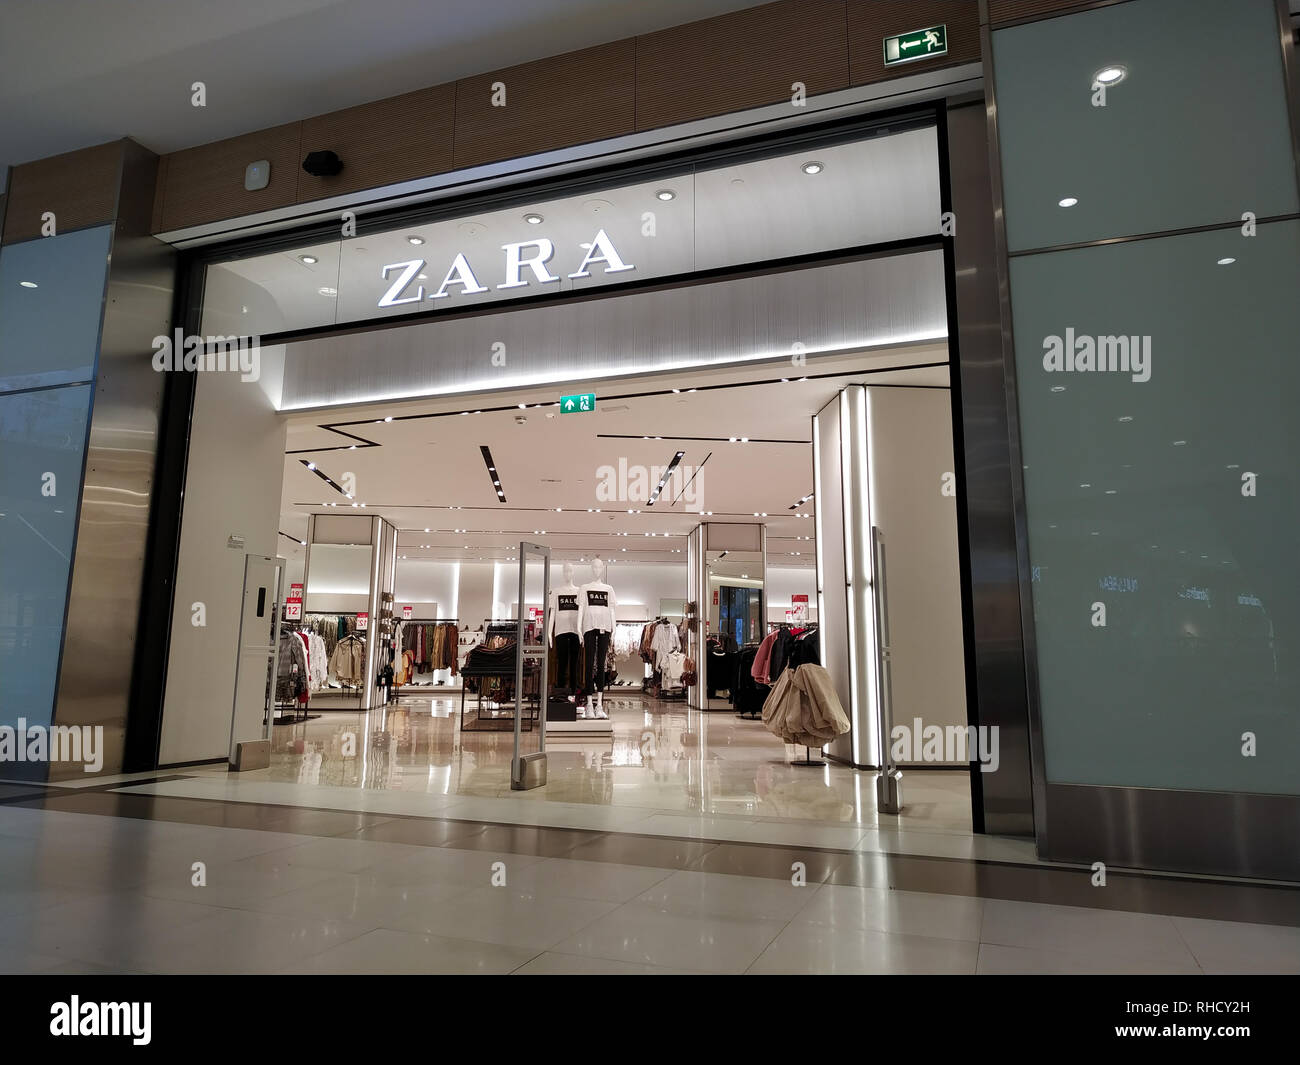 Page 2 - Zara Shop High Resolution Stock Photography and Images - Alamy